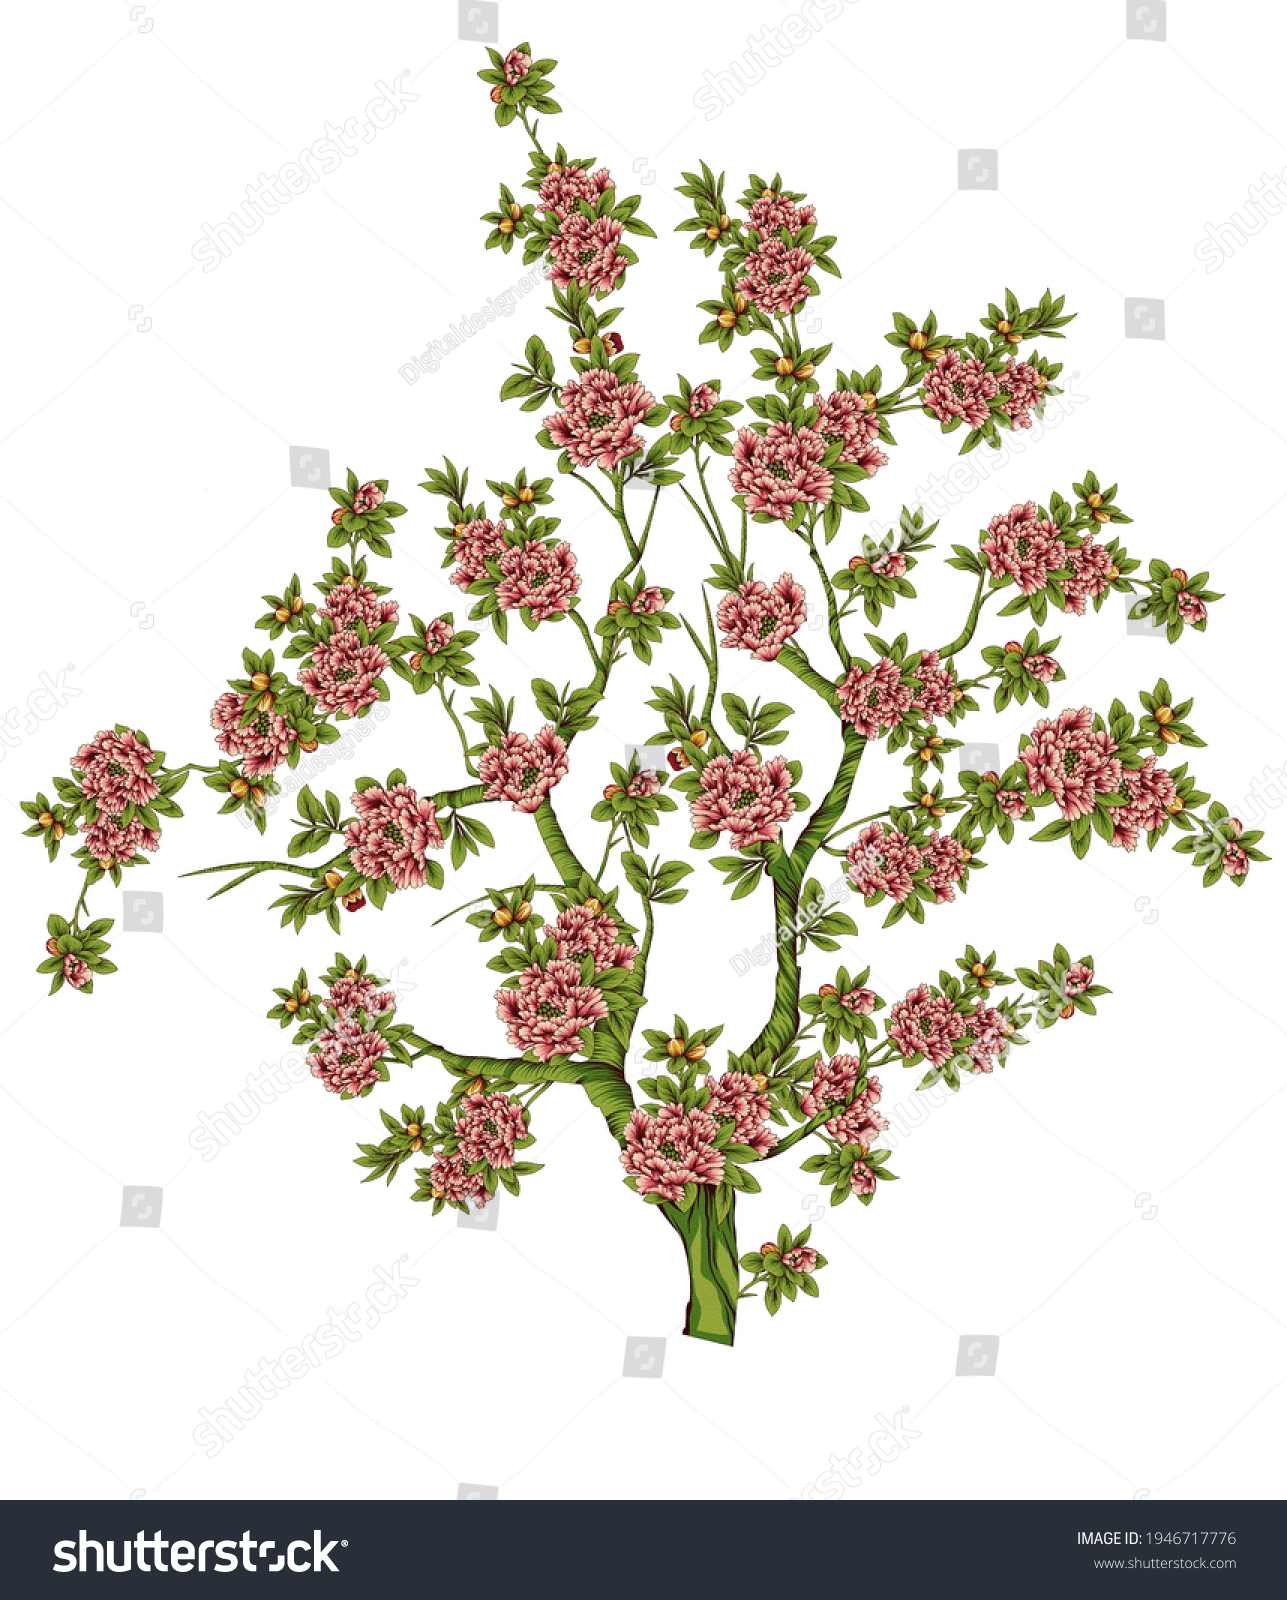 Antique Style Gold Flowers Leaves Decorative Stock Illustration ...